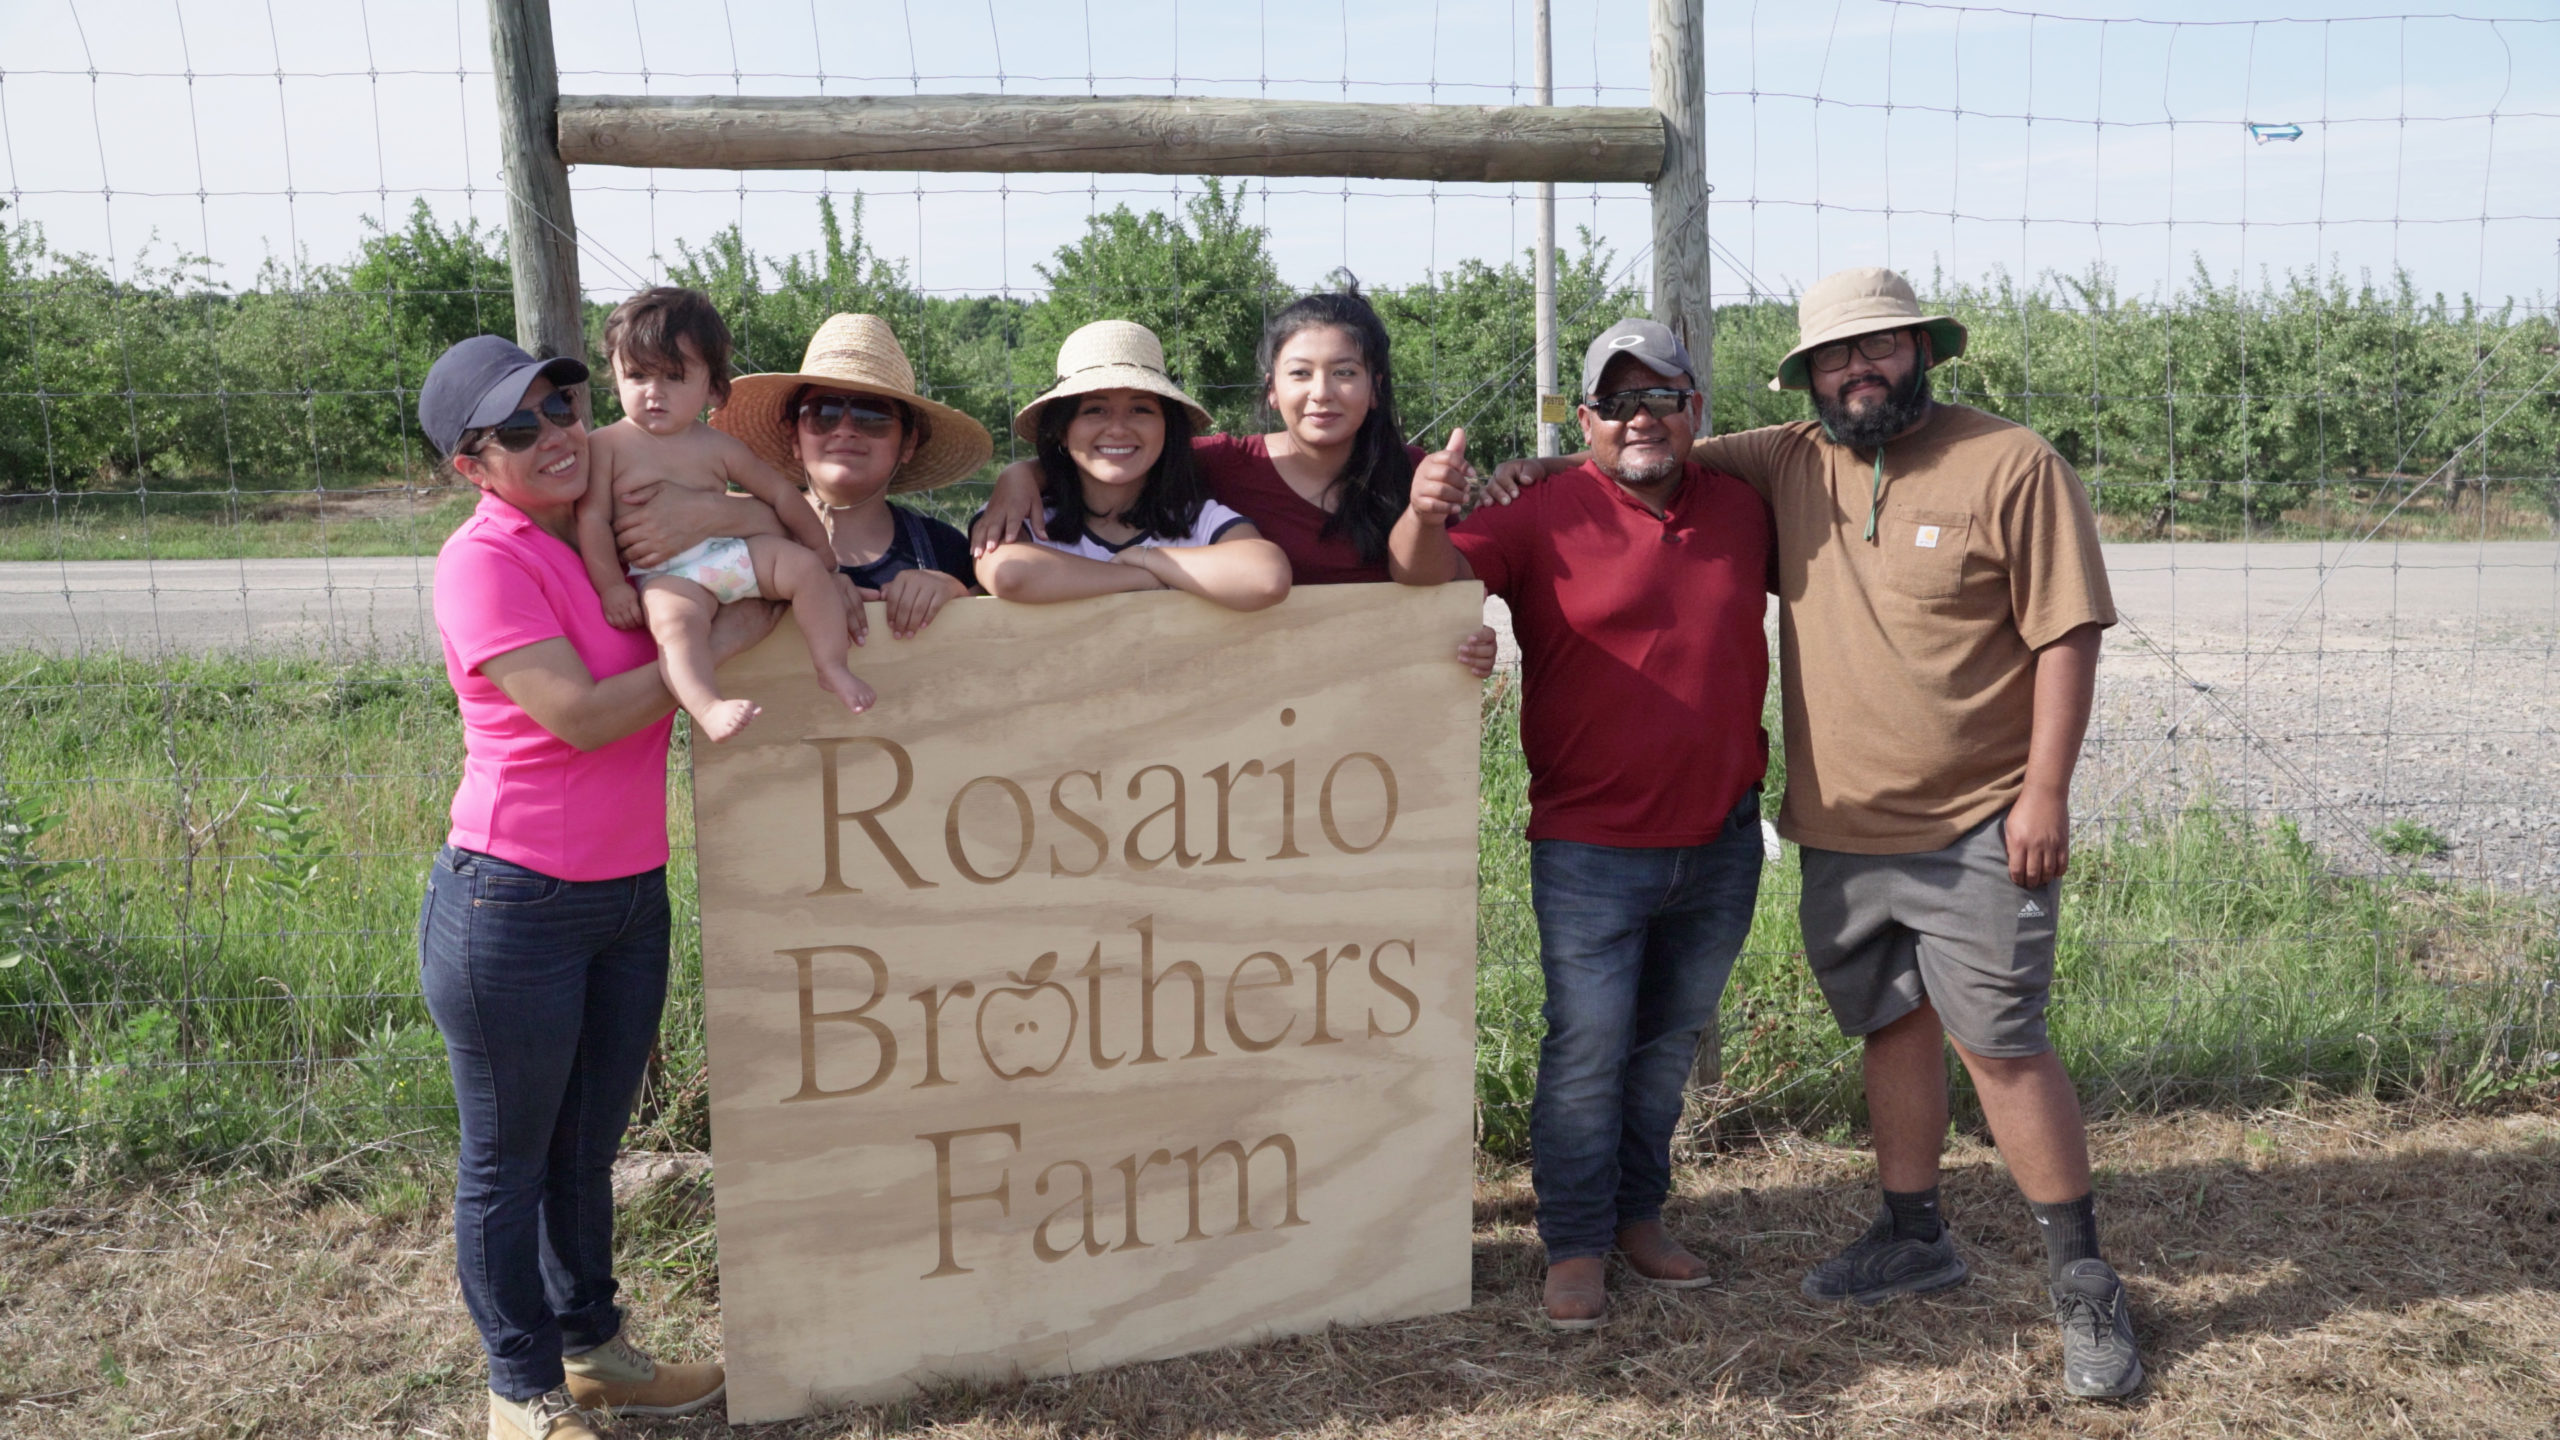 Sergio and Silvia Rosario participated in the Master Class series, then applied for a Smart Farming Team grant, gaining access to a small team of Spanish-speaking agricultural consultants to further their financial skills sets in support of their farm business.